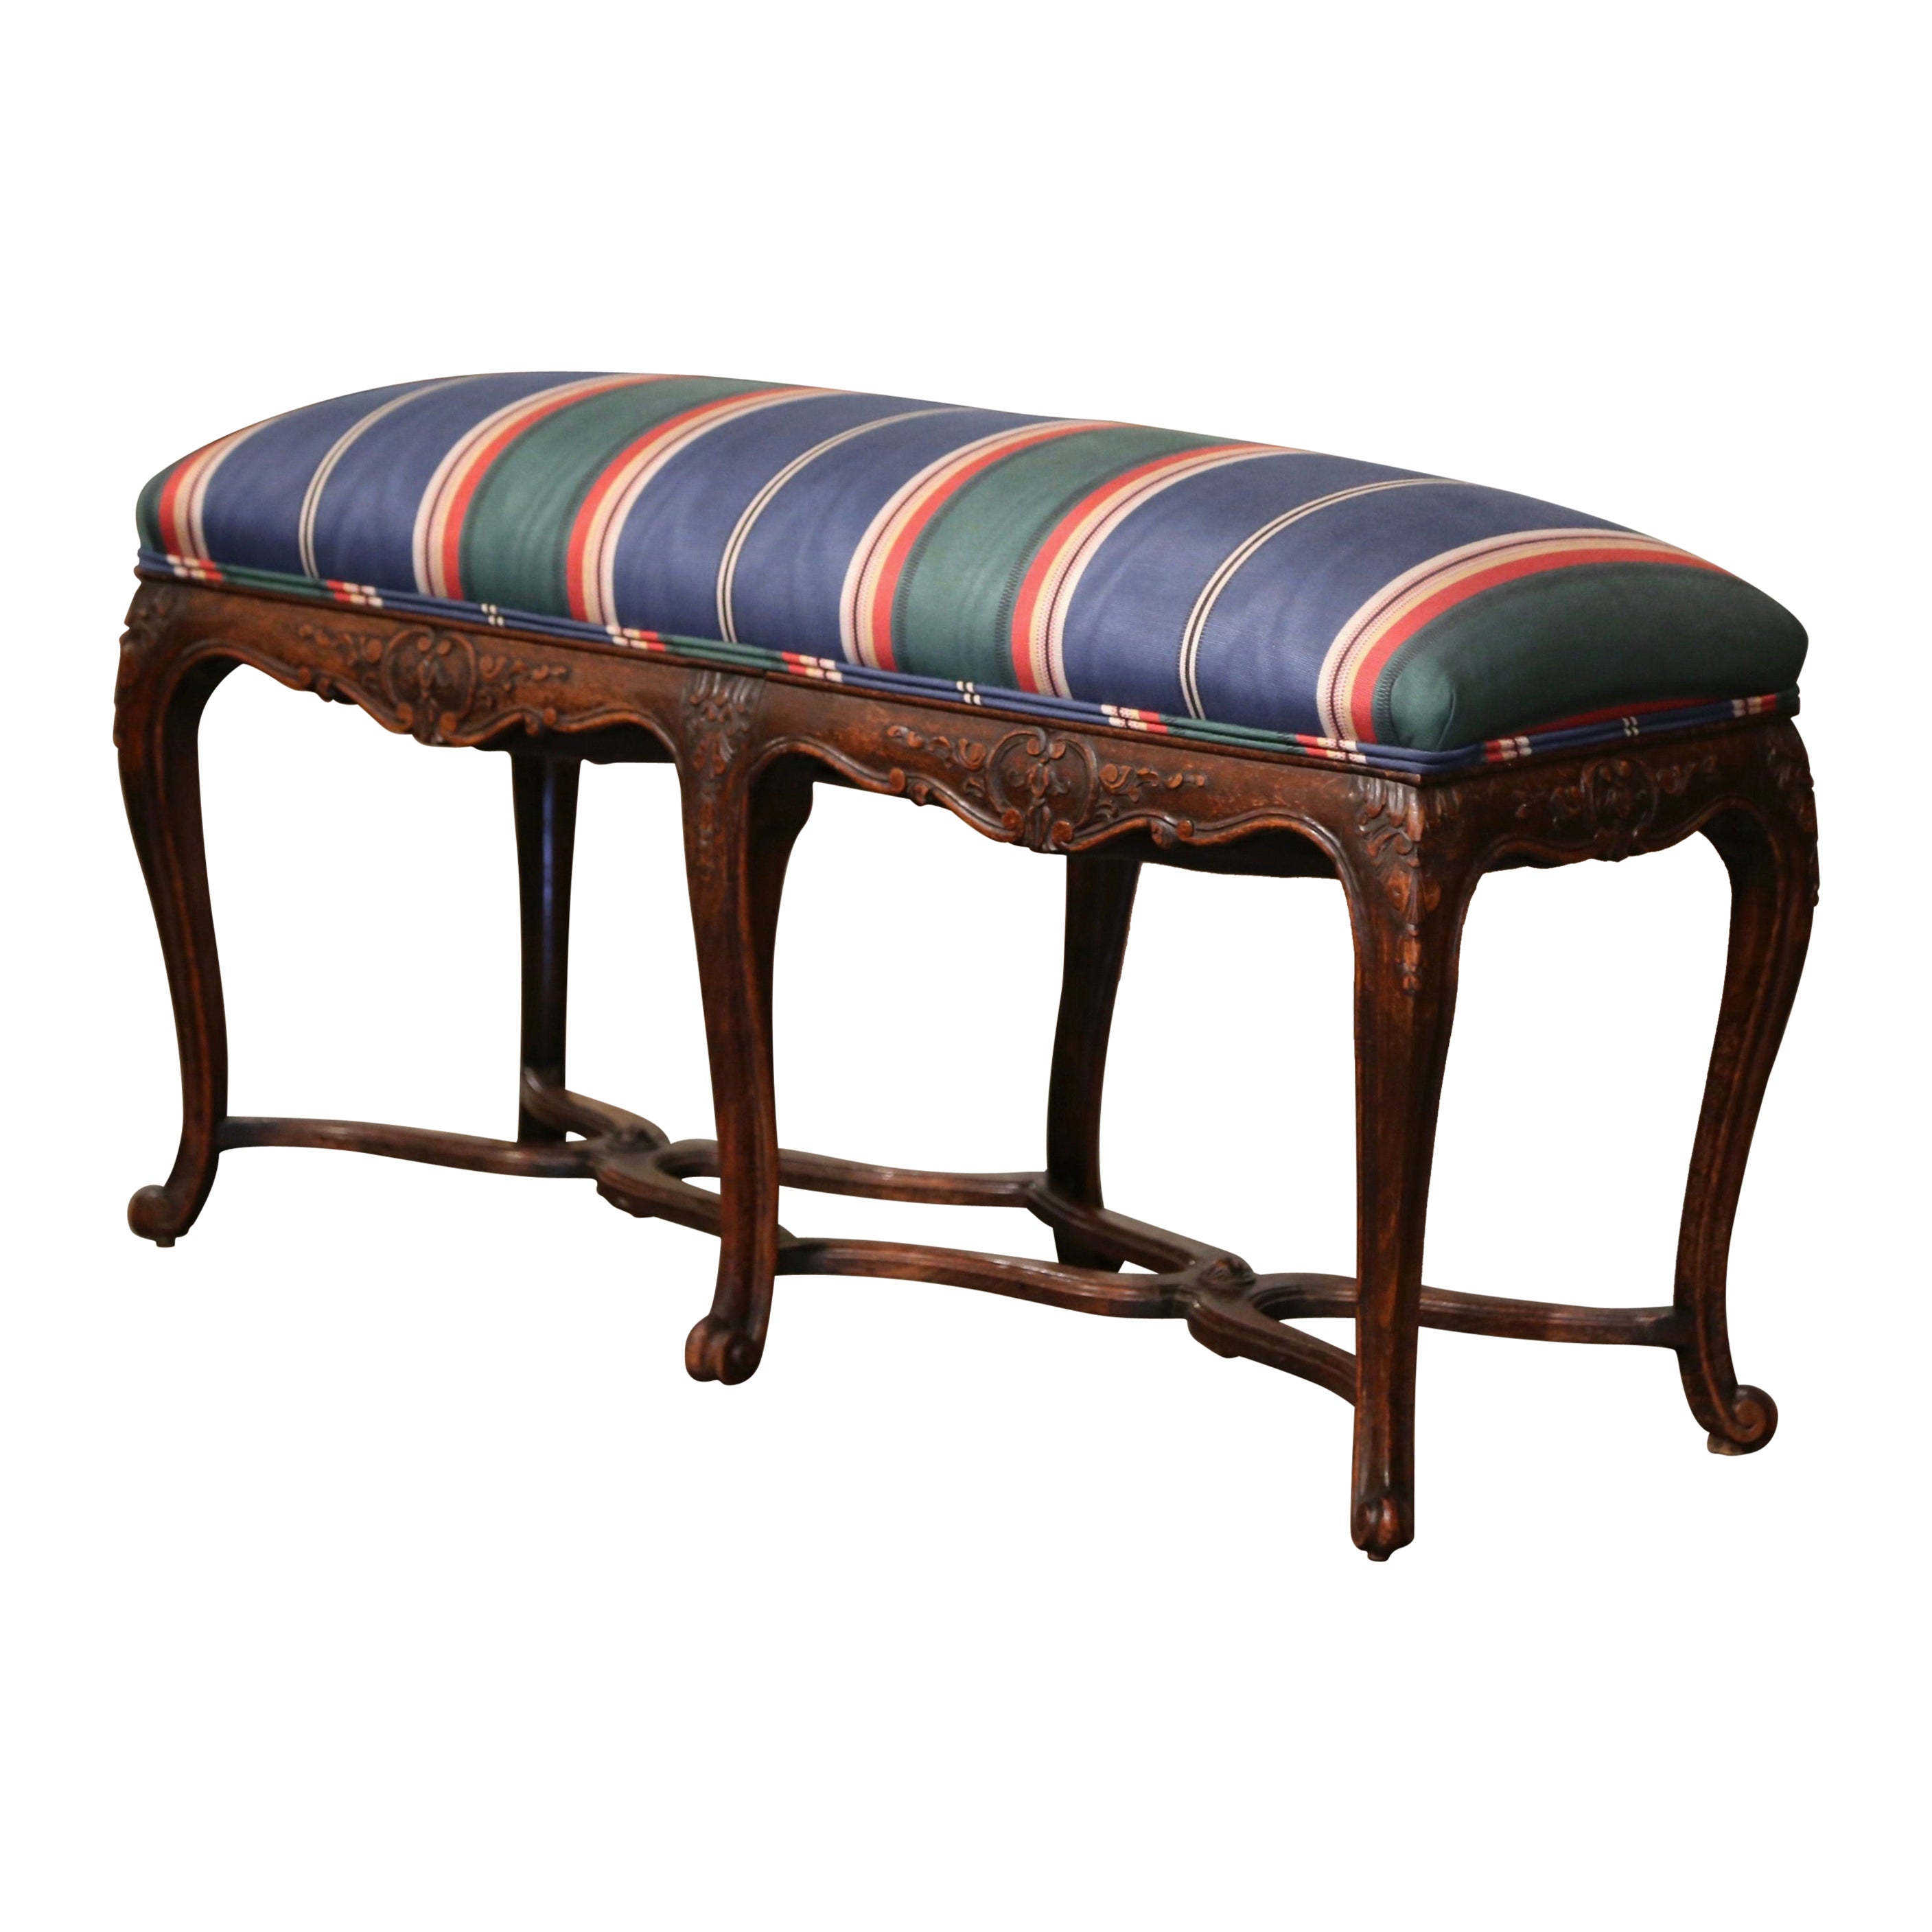 Early 20th Century French Louis XV Carved Walnut Six-Leg Upholstered Bench  For Sale